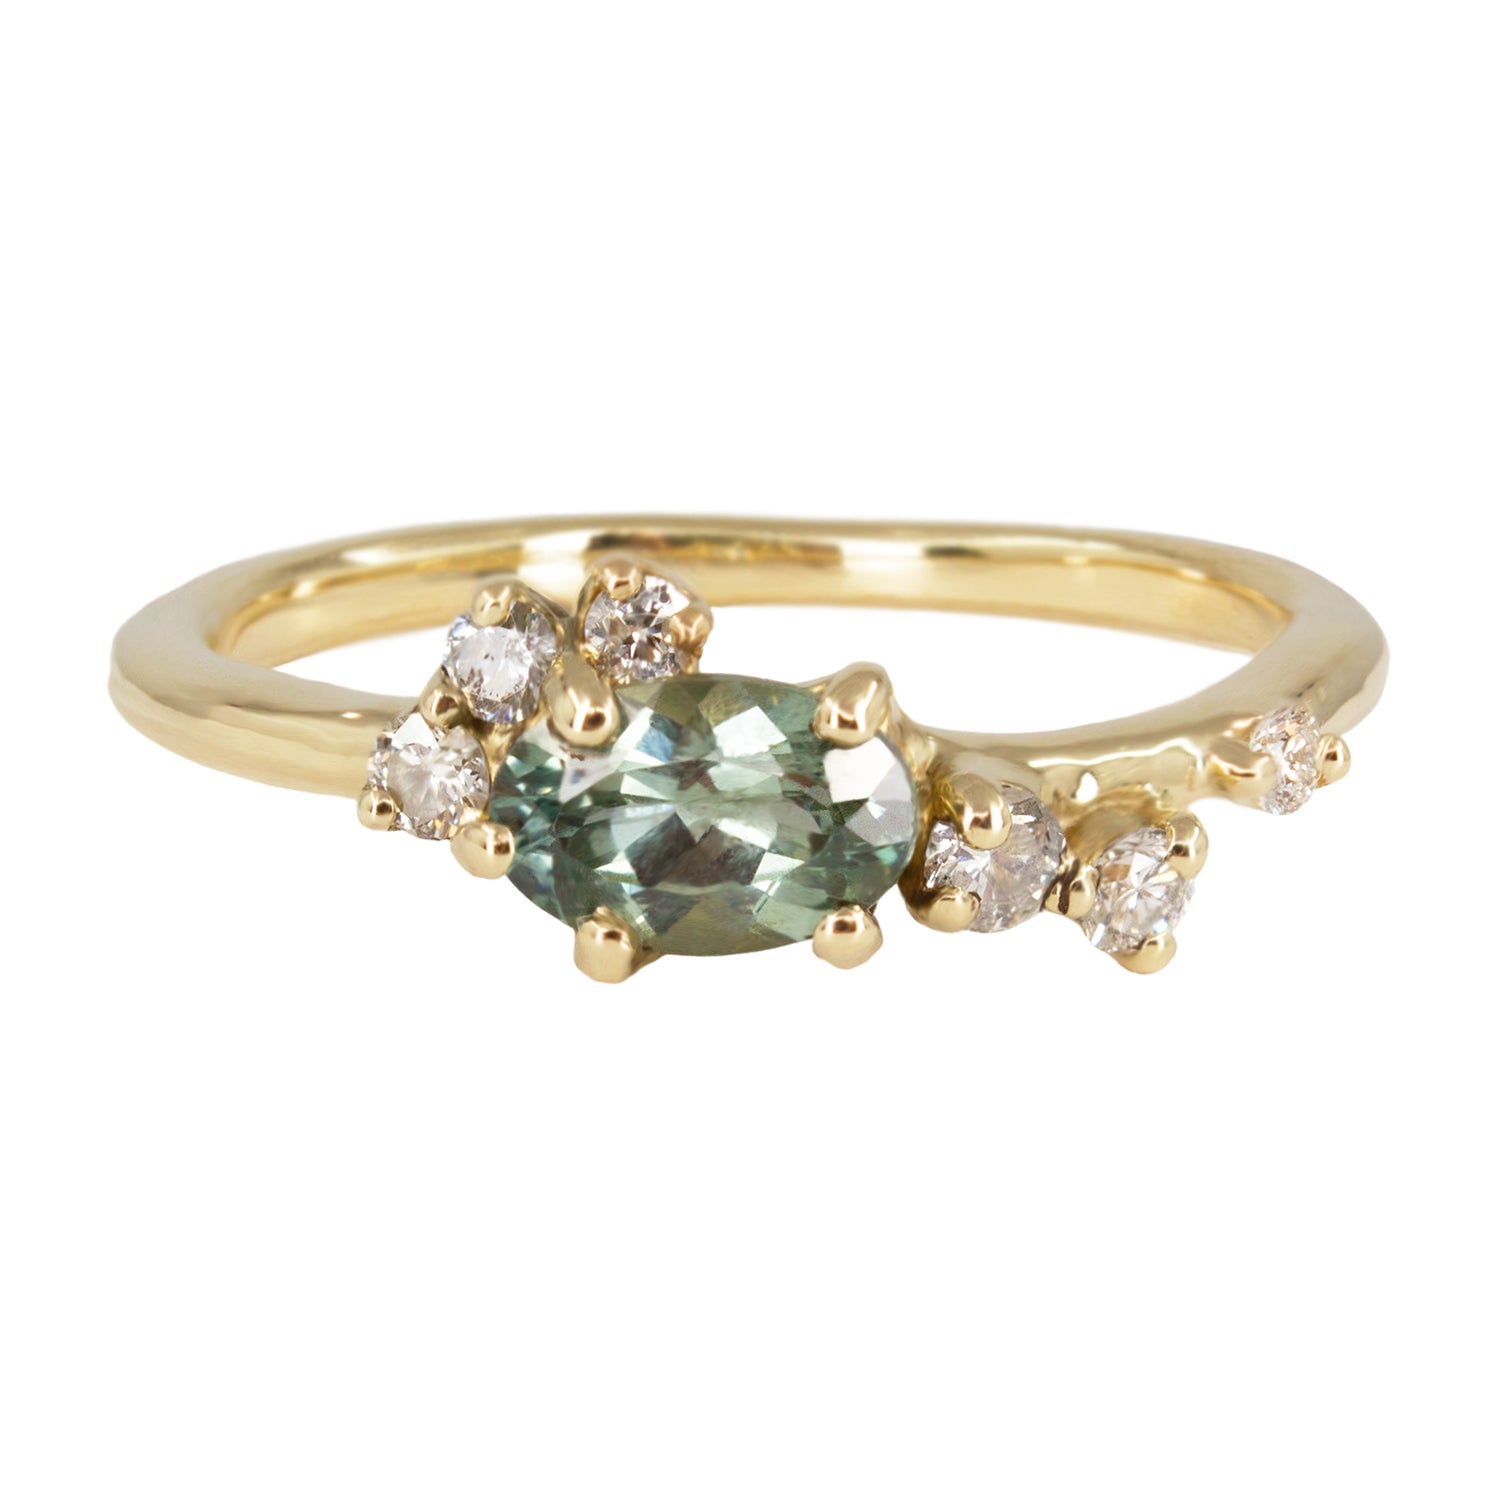 Delicate and beautiful ring featuring teal sapphire and white diamonds. Perfect option as an alternative engagement ring for a modern bride.